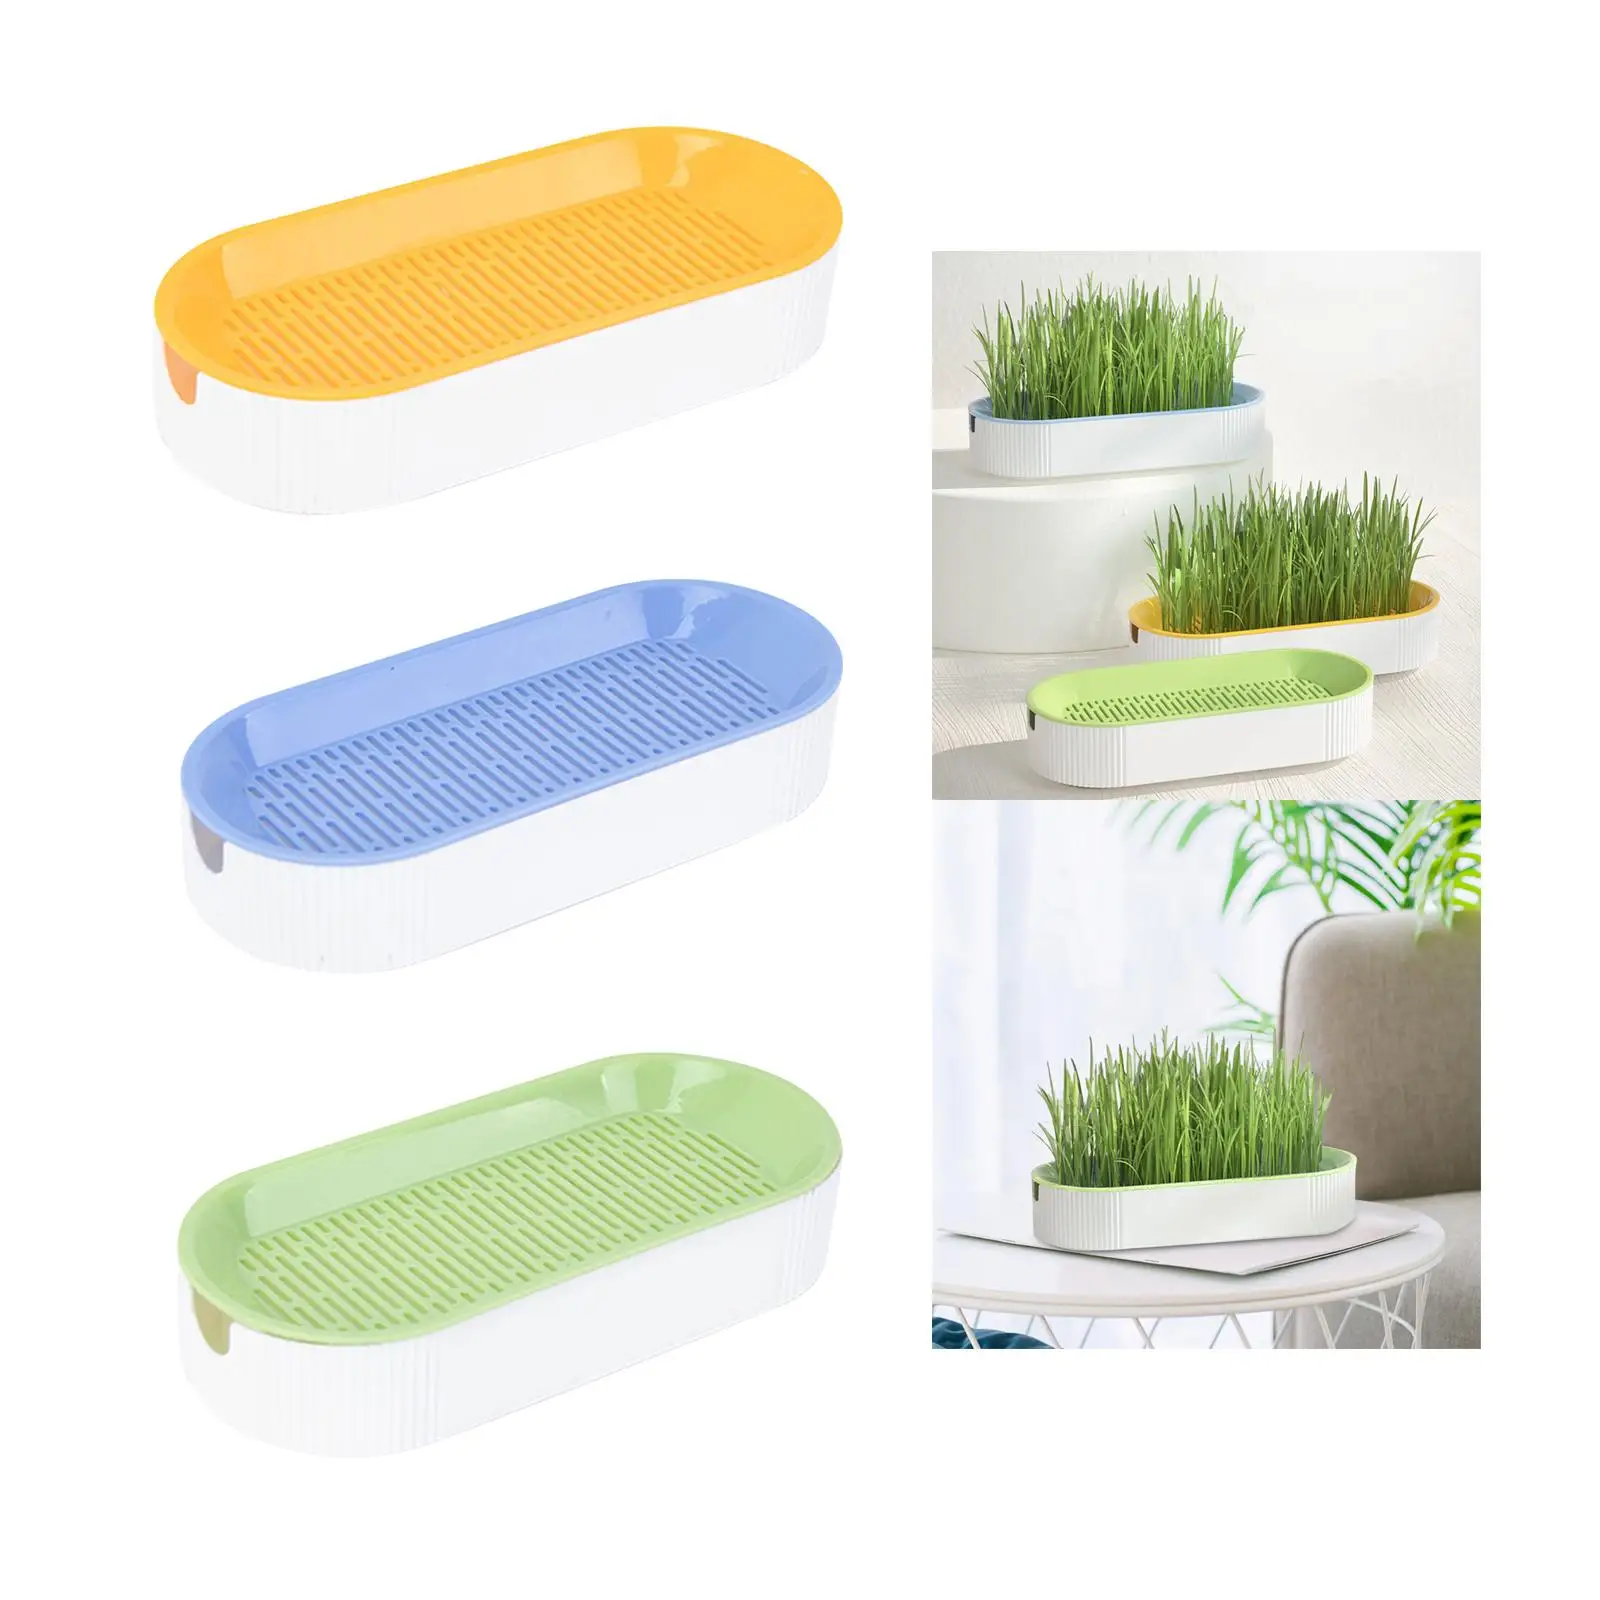 Cat Grass Planter Tray with Drain Holes Wheatgrass Grower Seed Sprouter Tray